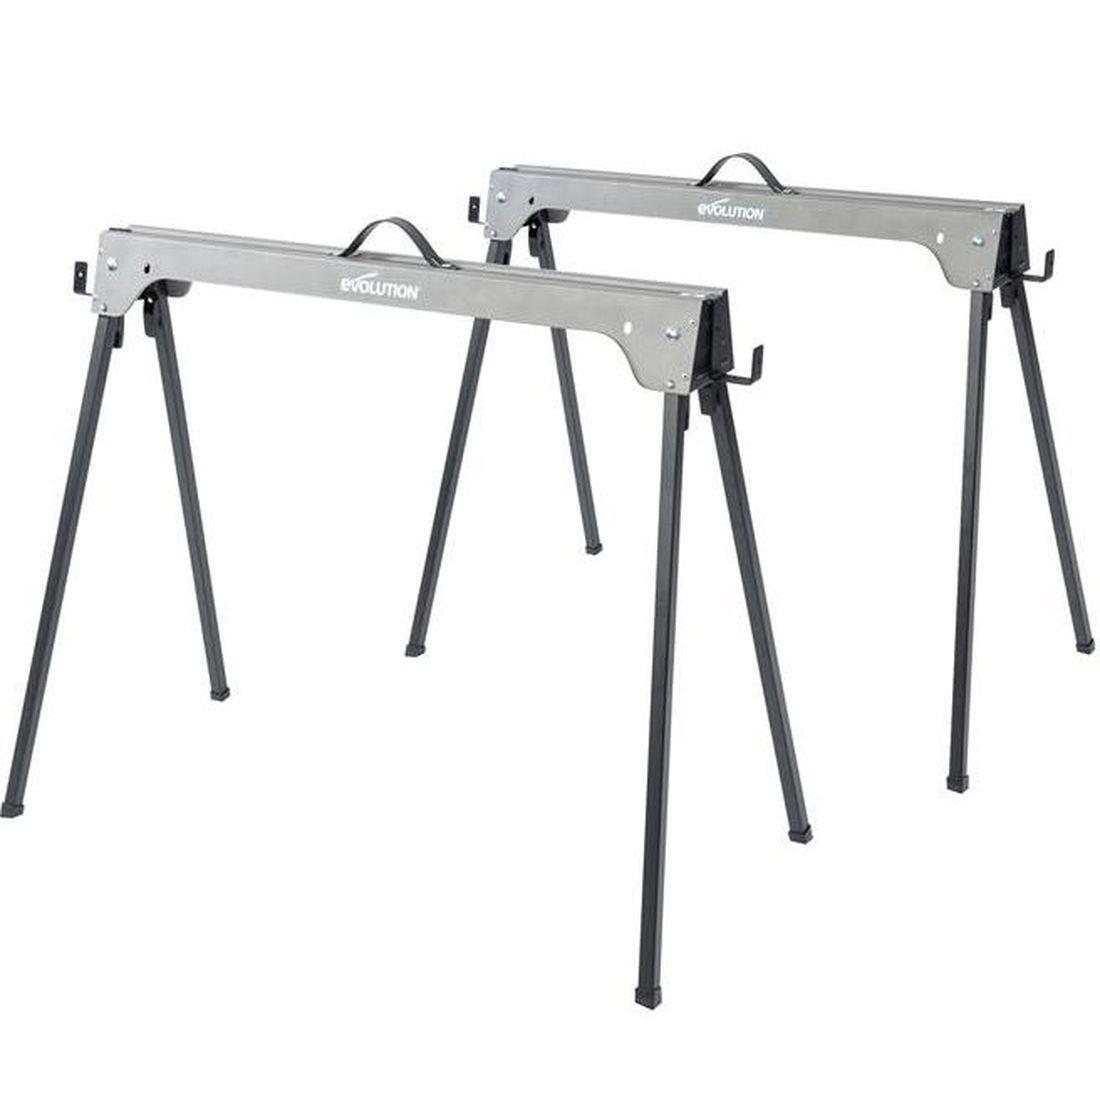 Evolution Metal Folding Sawhorse Stand (Twin Pack)                                        